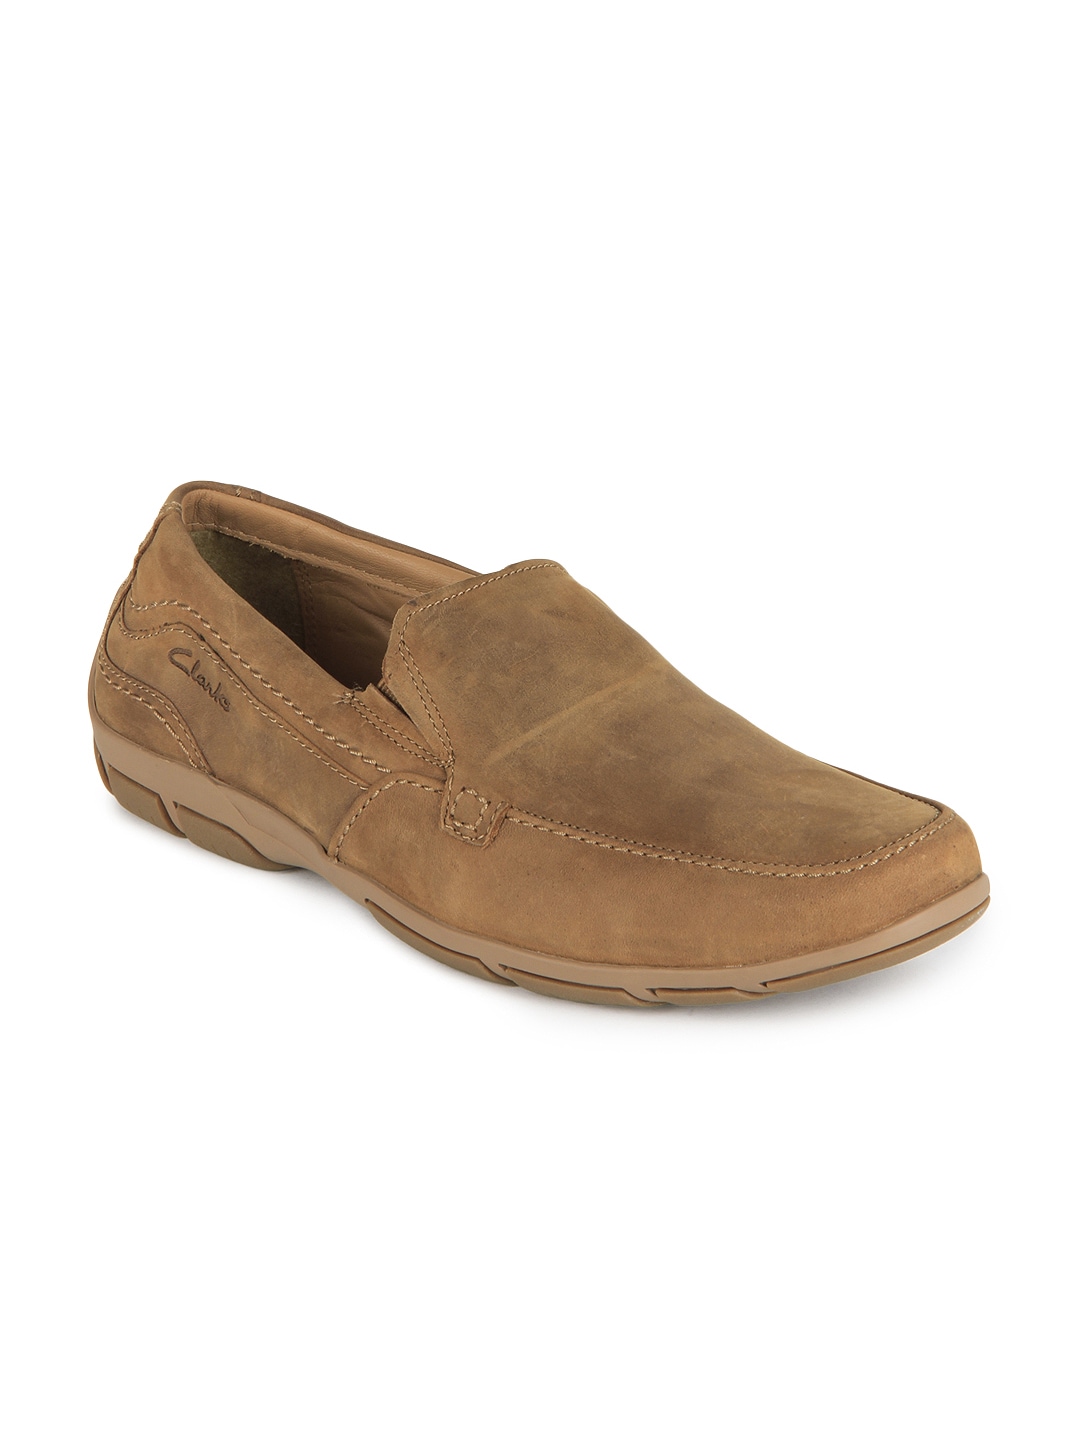 Clarks Men Brown Latch Port Suede Loafers